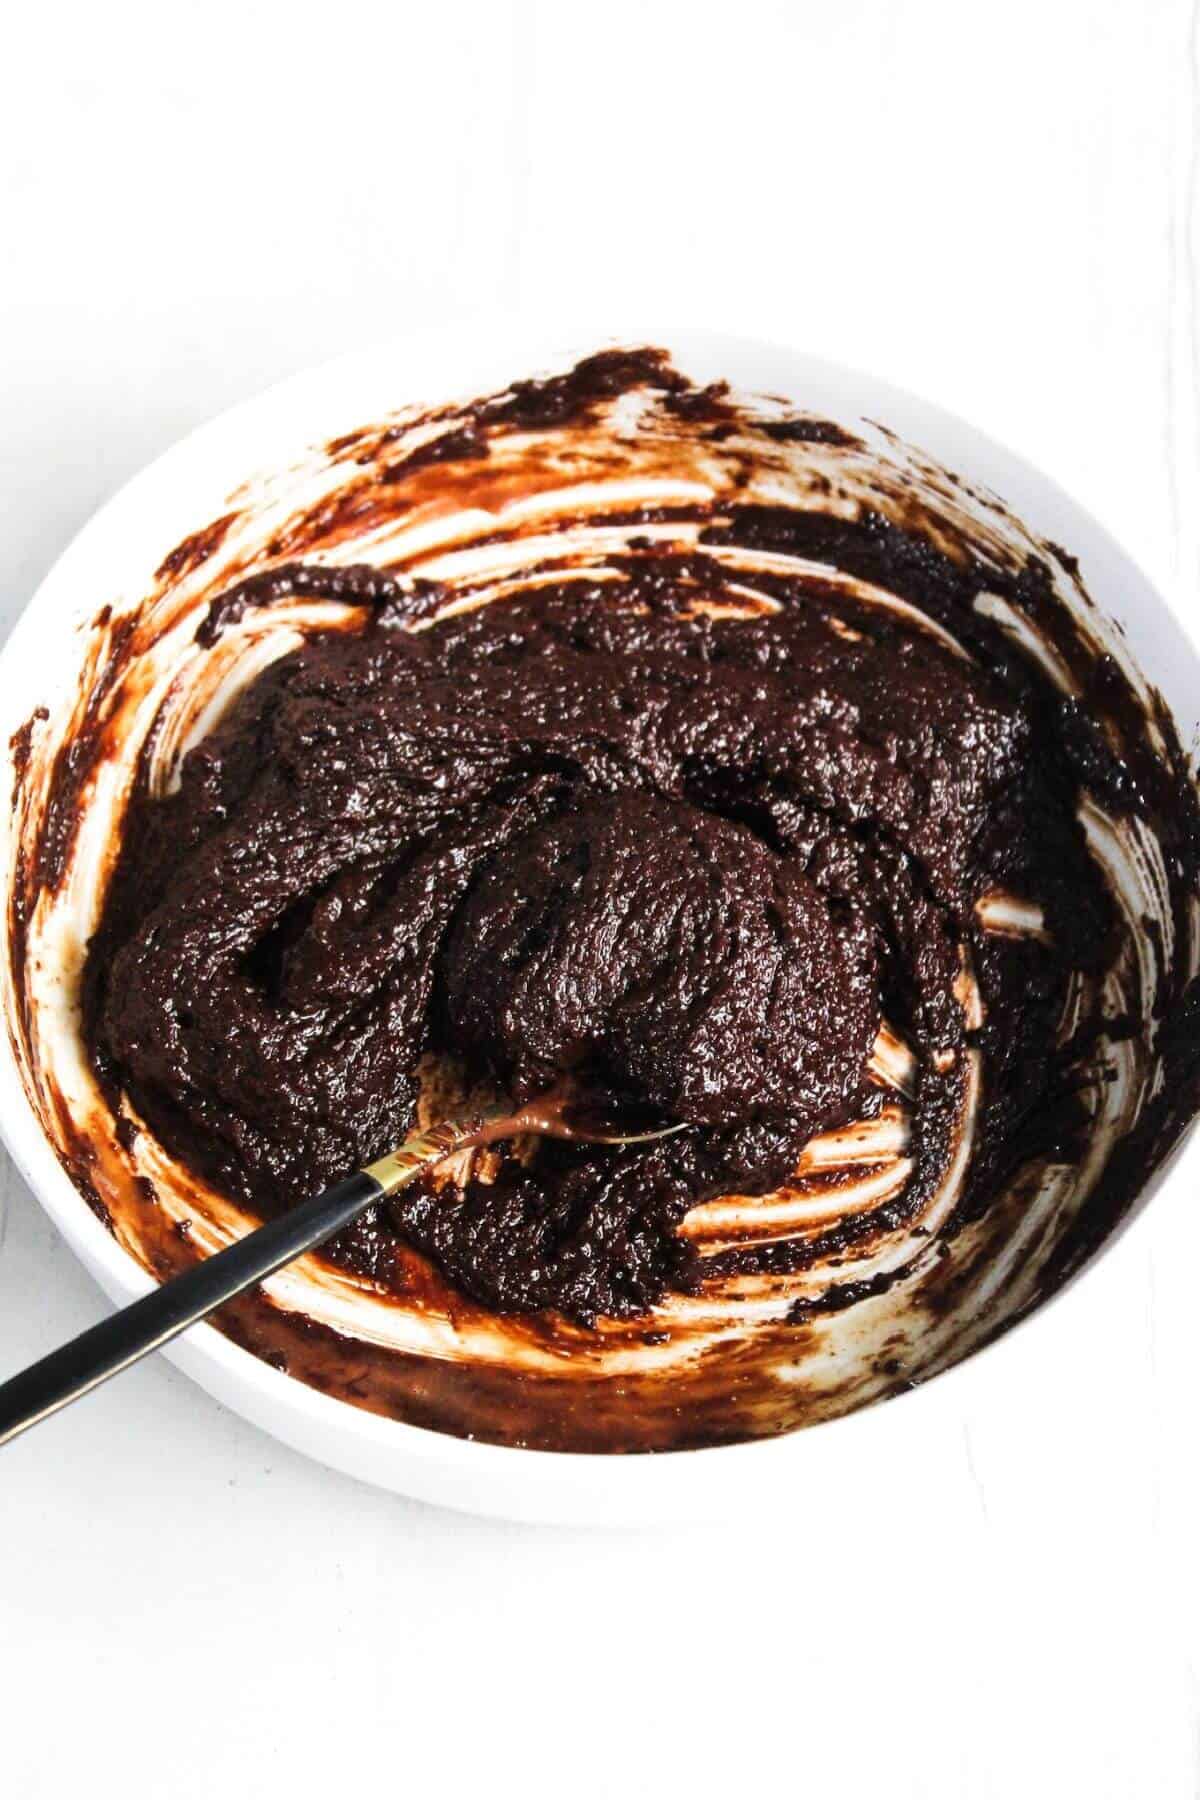 A bowl of thick, dark chocolate batter with a spoon, partially mixed with visible streaks of unmixed batter.